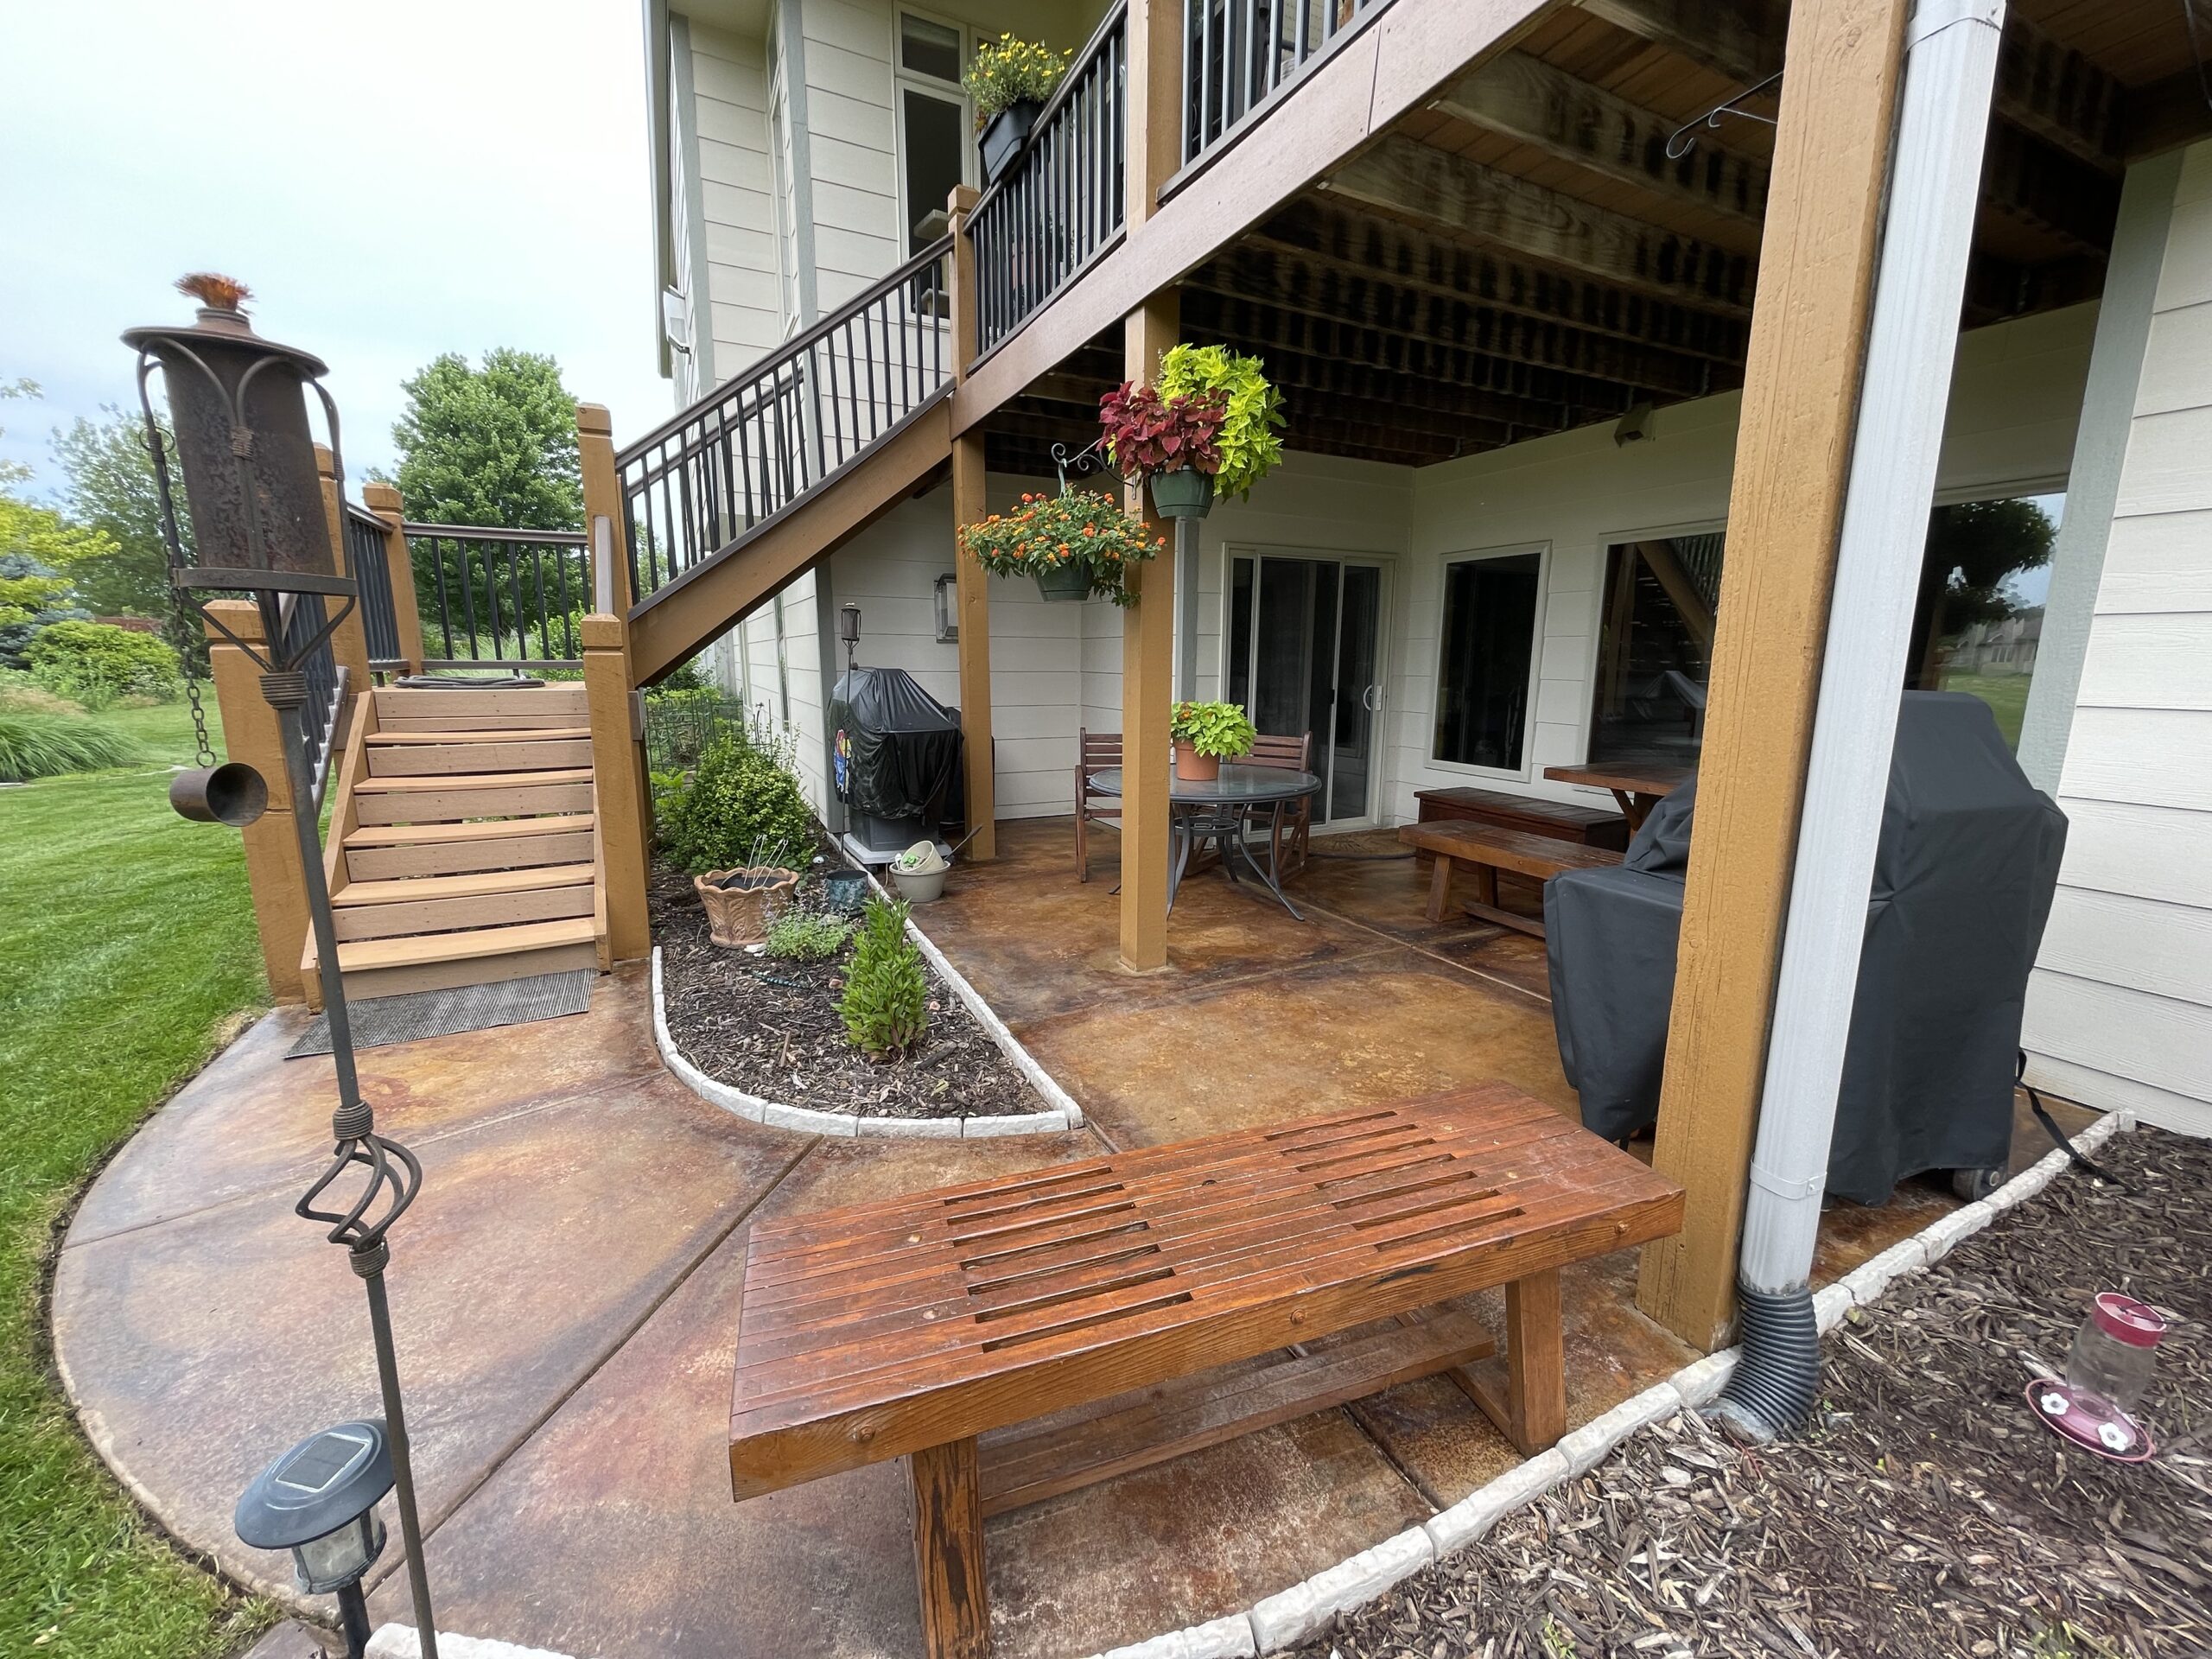 Transformed round patio showcasing a rich blend of Malayan Buff, Desert Amber, and English Red acid stains, complementing the refinished redwood furniture